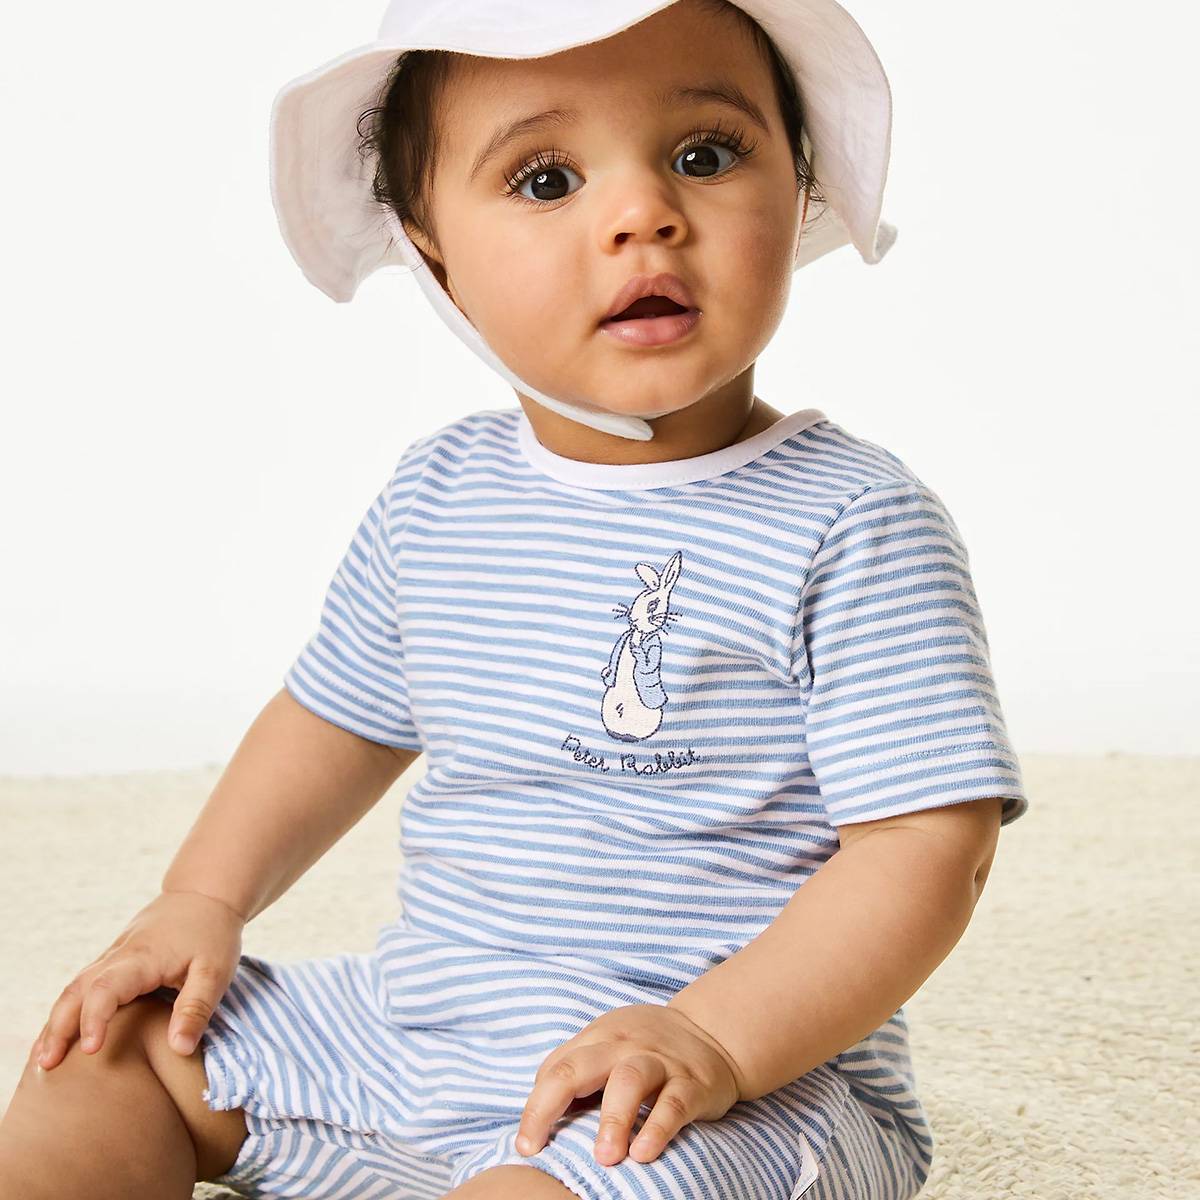 Baby wearing short-sleeve stripe outfit 